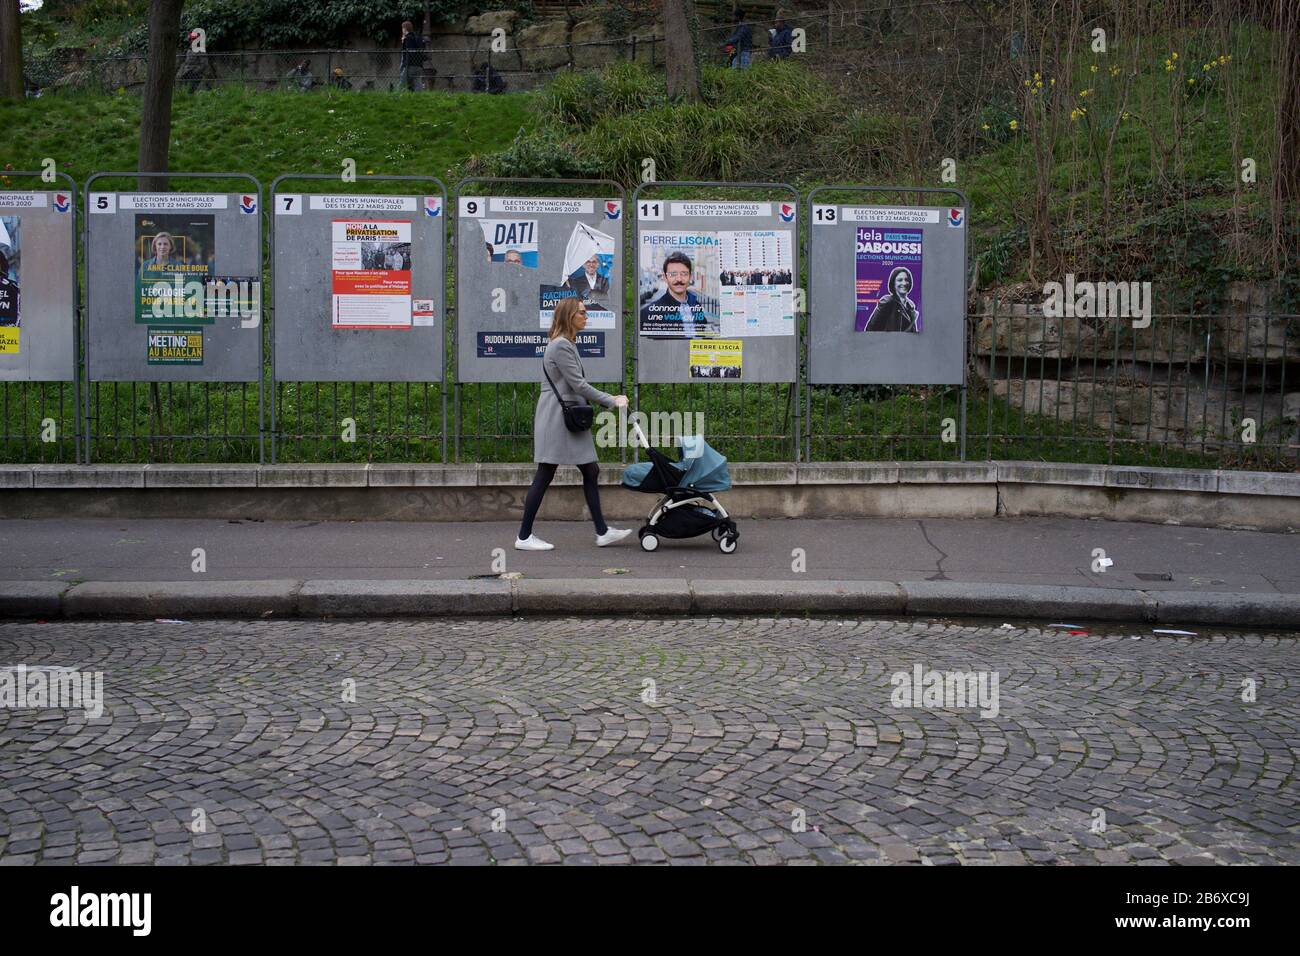 Woman with pram walks past panels displaying electoral candidates running in French municipal elections, rue Ronsard, Montmartre, 75018 Paris, France, March 2020 Stock Photo